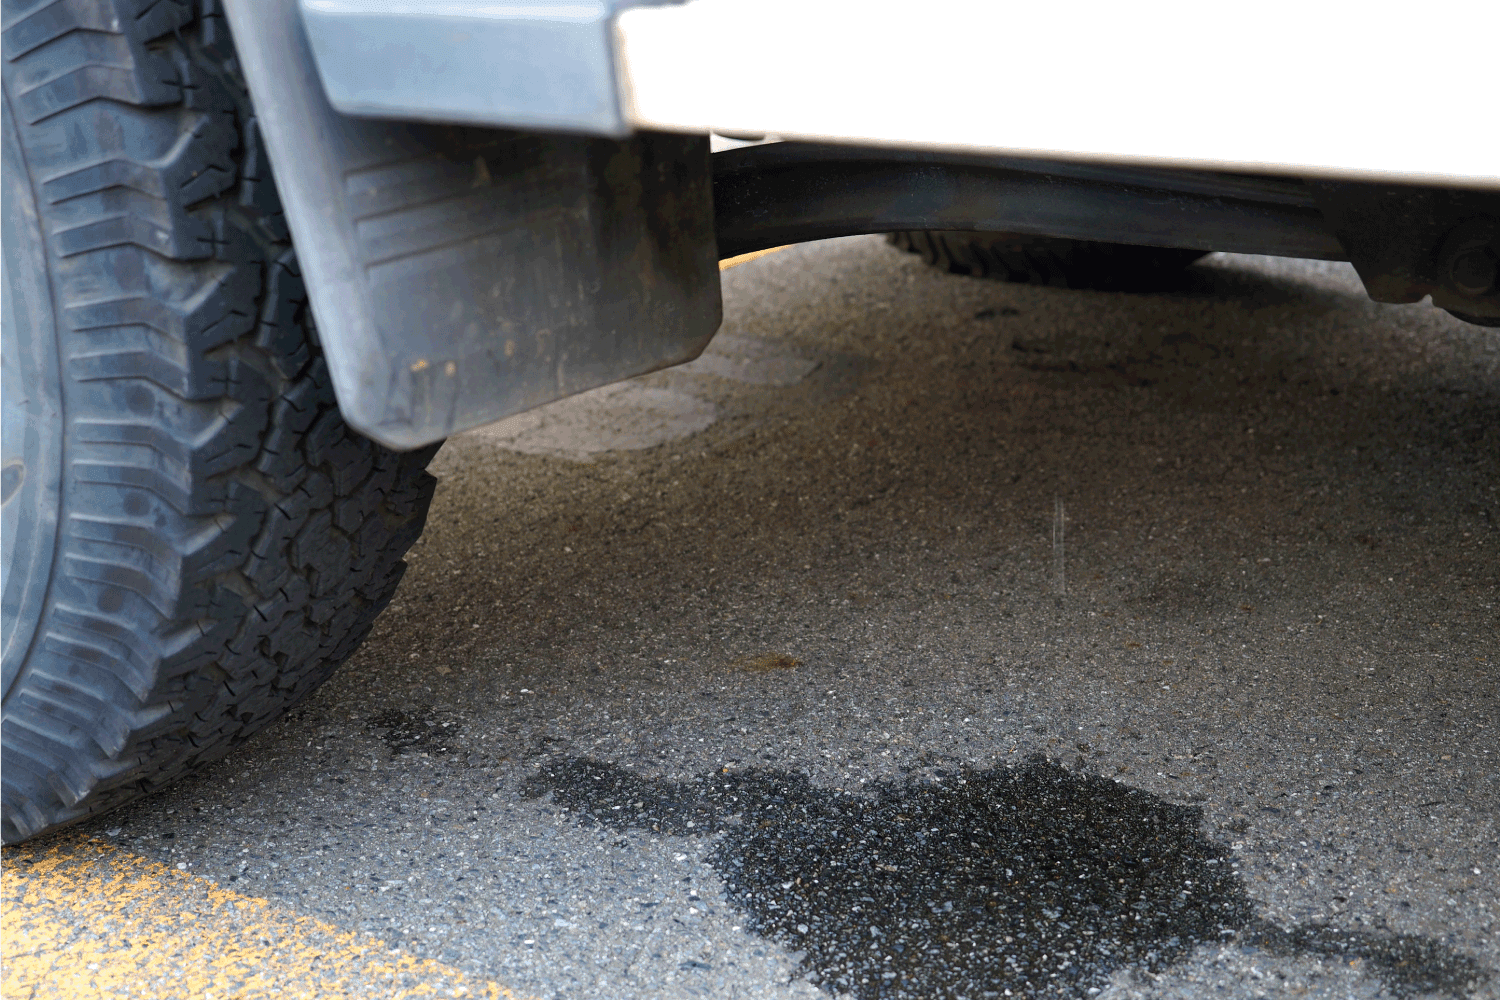 water dripping from the vehicle drainage